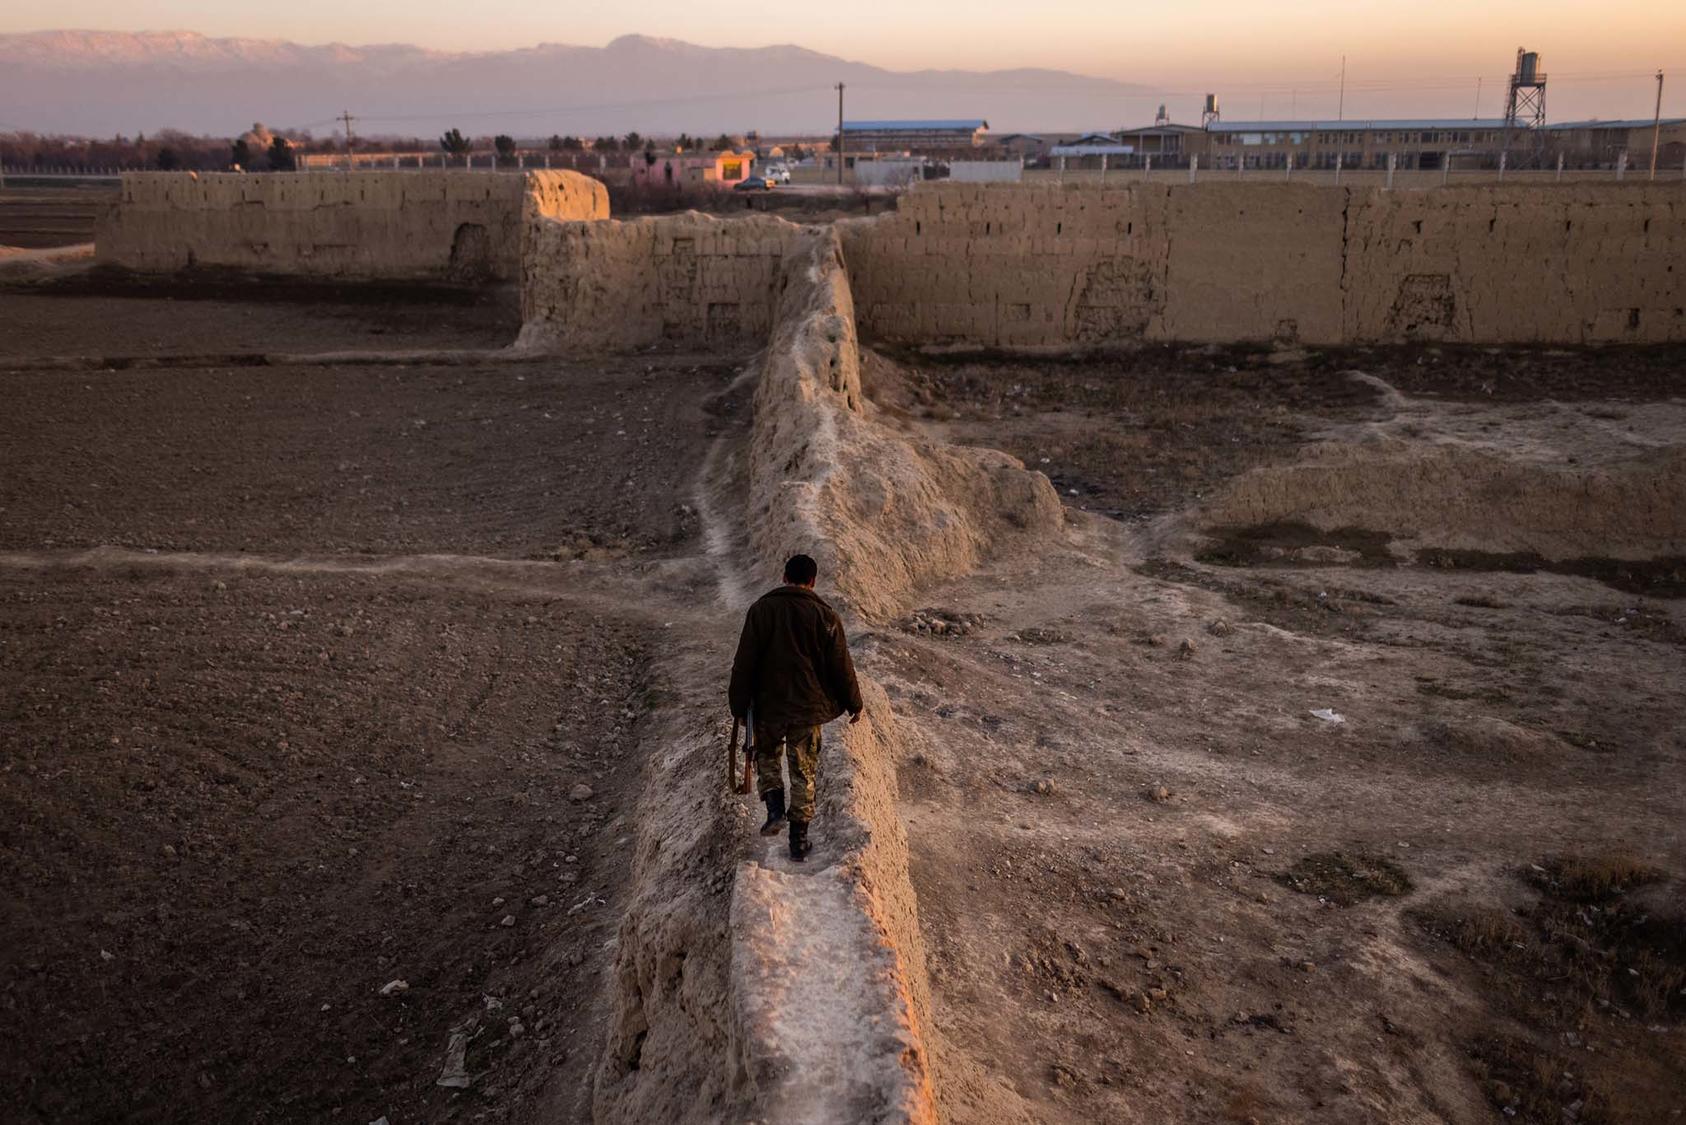 An Afghan policeman in Mazar-i-Sharif, a northern city in Afghanistan, on Jan. 17, 2021. The Taliban’s rapid seizure of rural parts of northern Afghanistan has countries in the region preparing for the militiant group to control Afghanistan. (Jim Huylebroek/The New York Times)